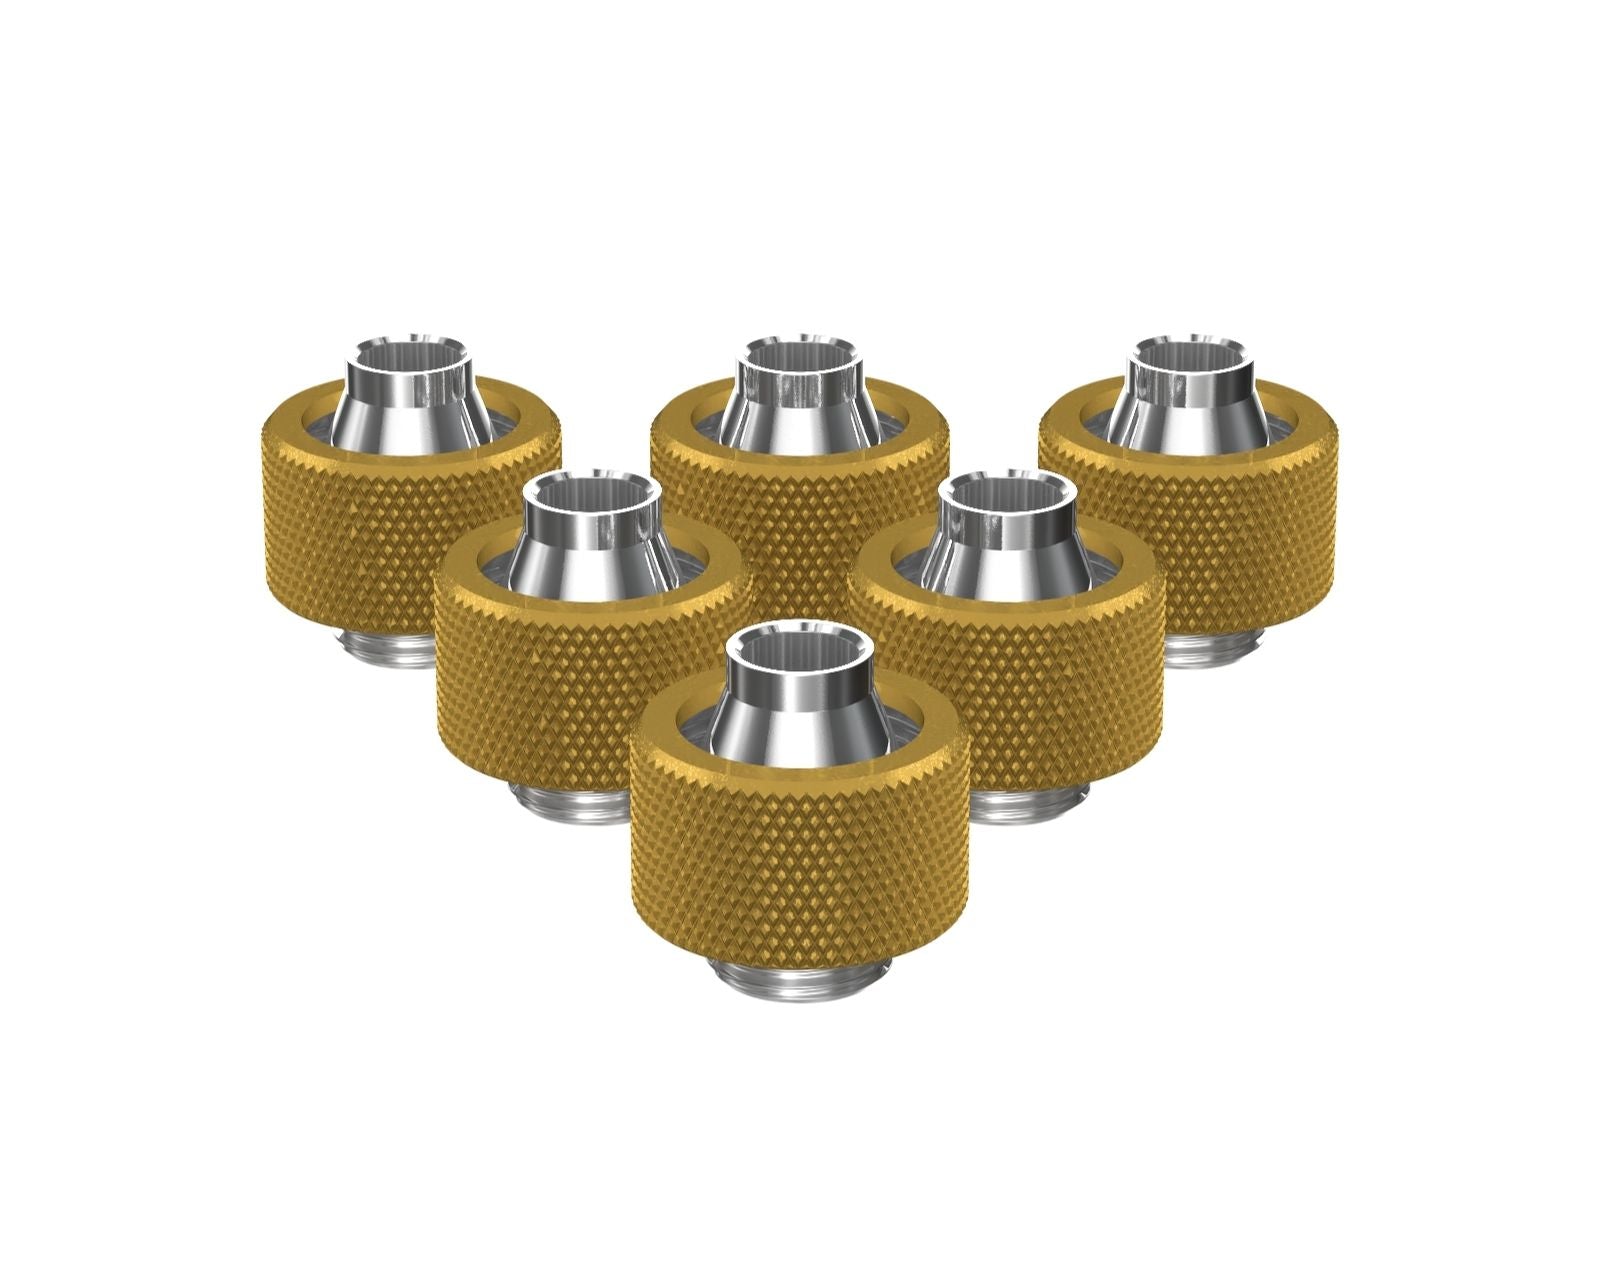 PrimoChill SecureFit SX - Premium Compression Fitting For 7/16in ID x 5/8in OD Flexible Tubing 6 Pack (F-SFSX758-6) - Available in 20+ Colors, Custom Watercooling Loop Ready - Gold